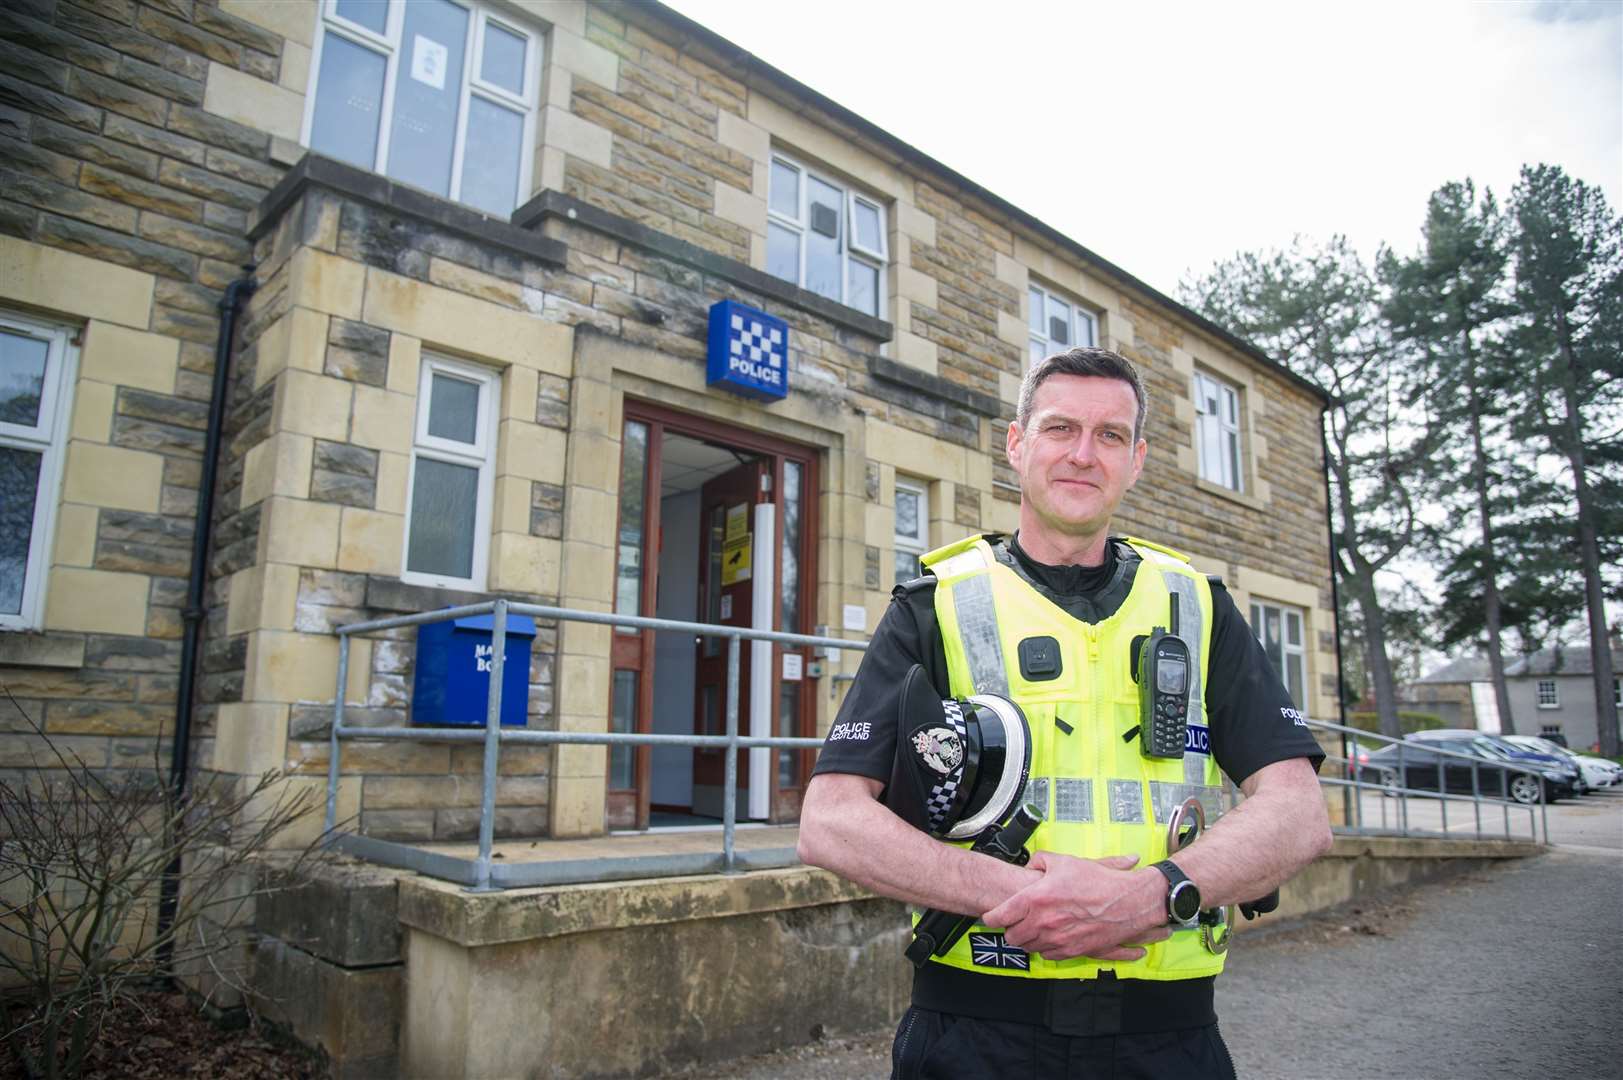 Inspector Tony McCulie at Forres Police Station.